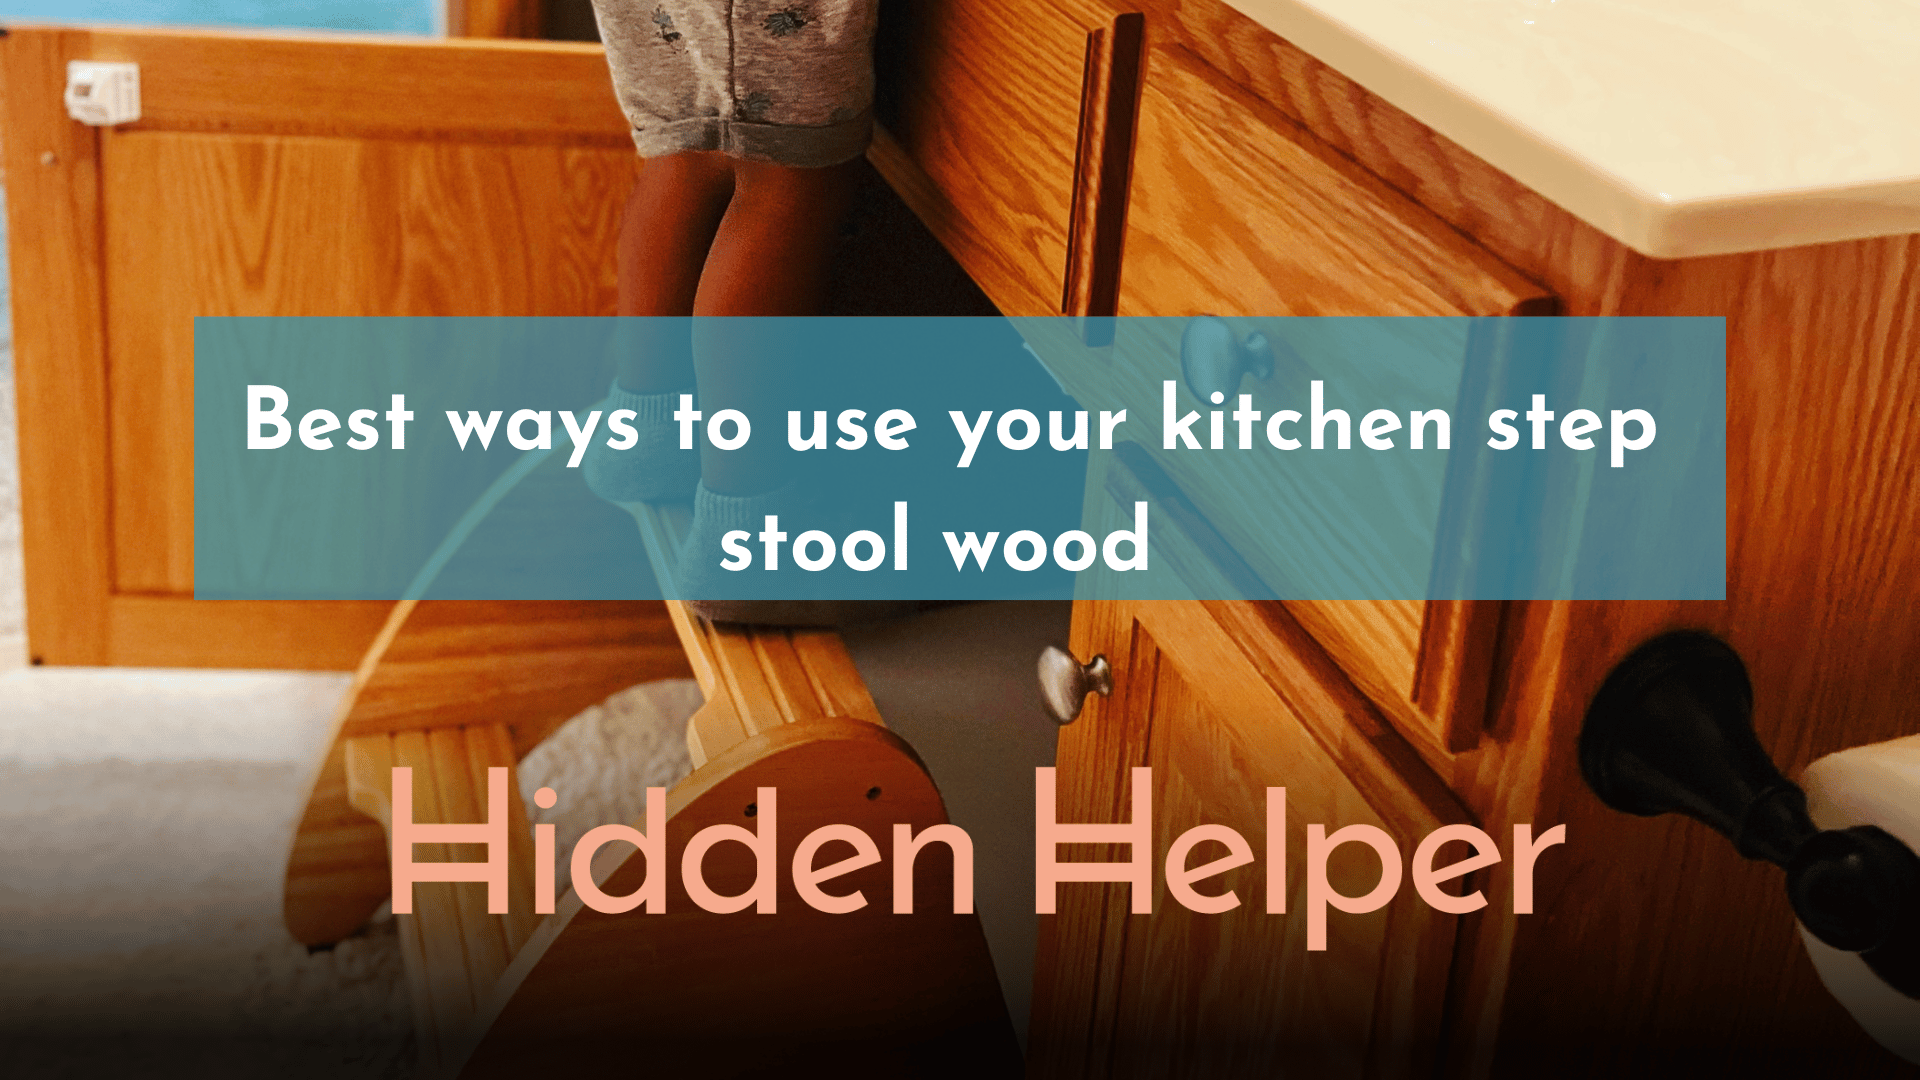 Best ways to use your kitchen step stool wood 